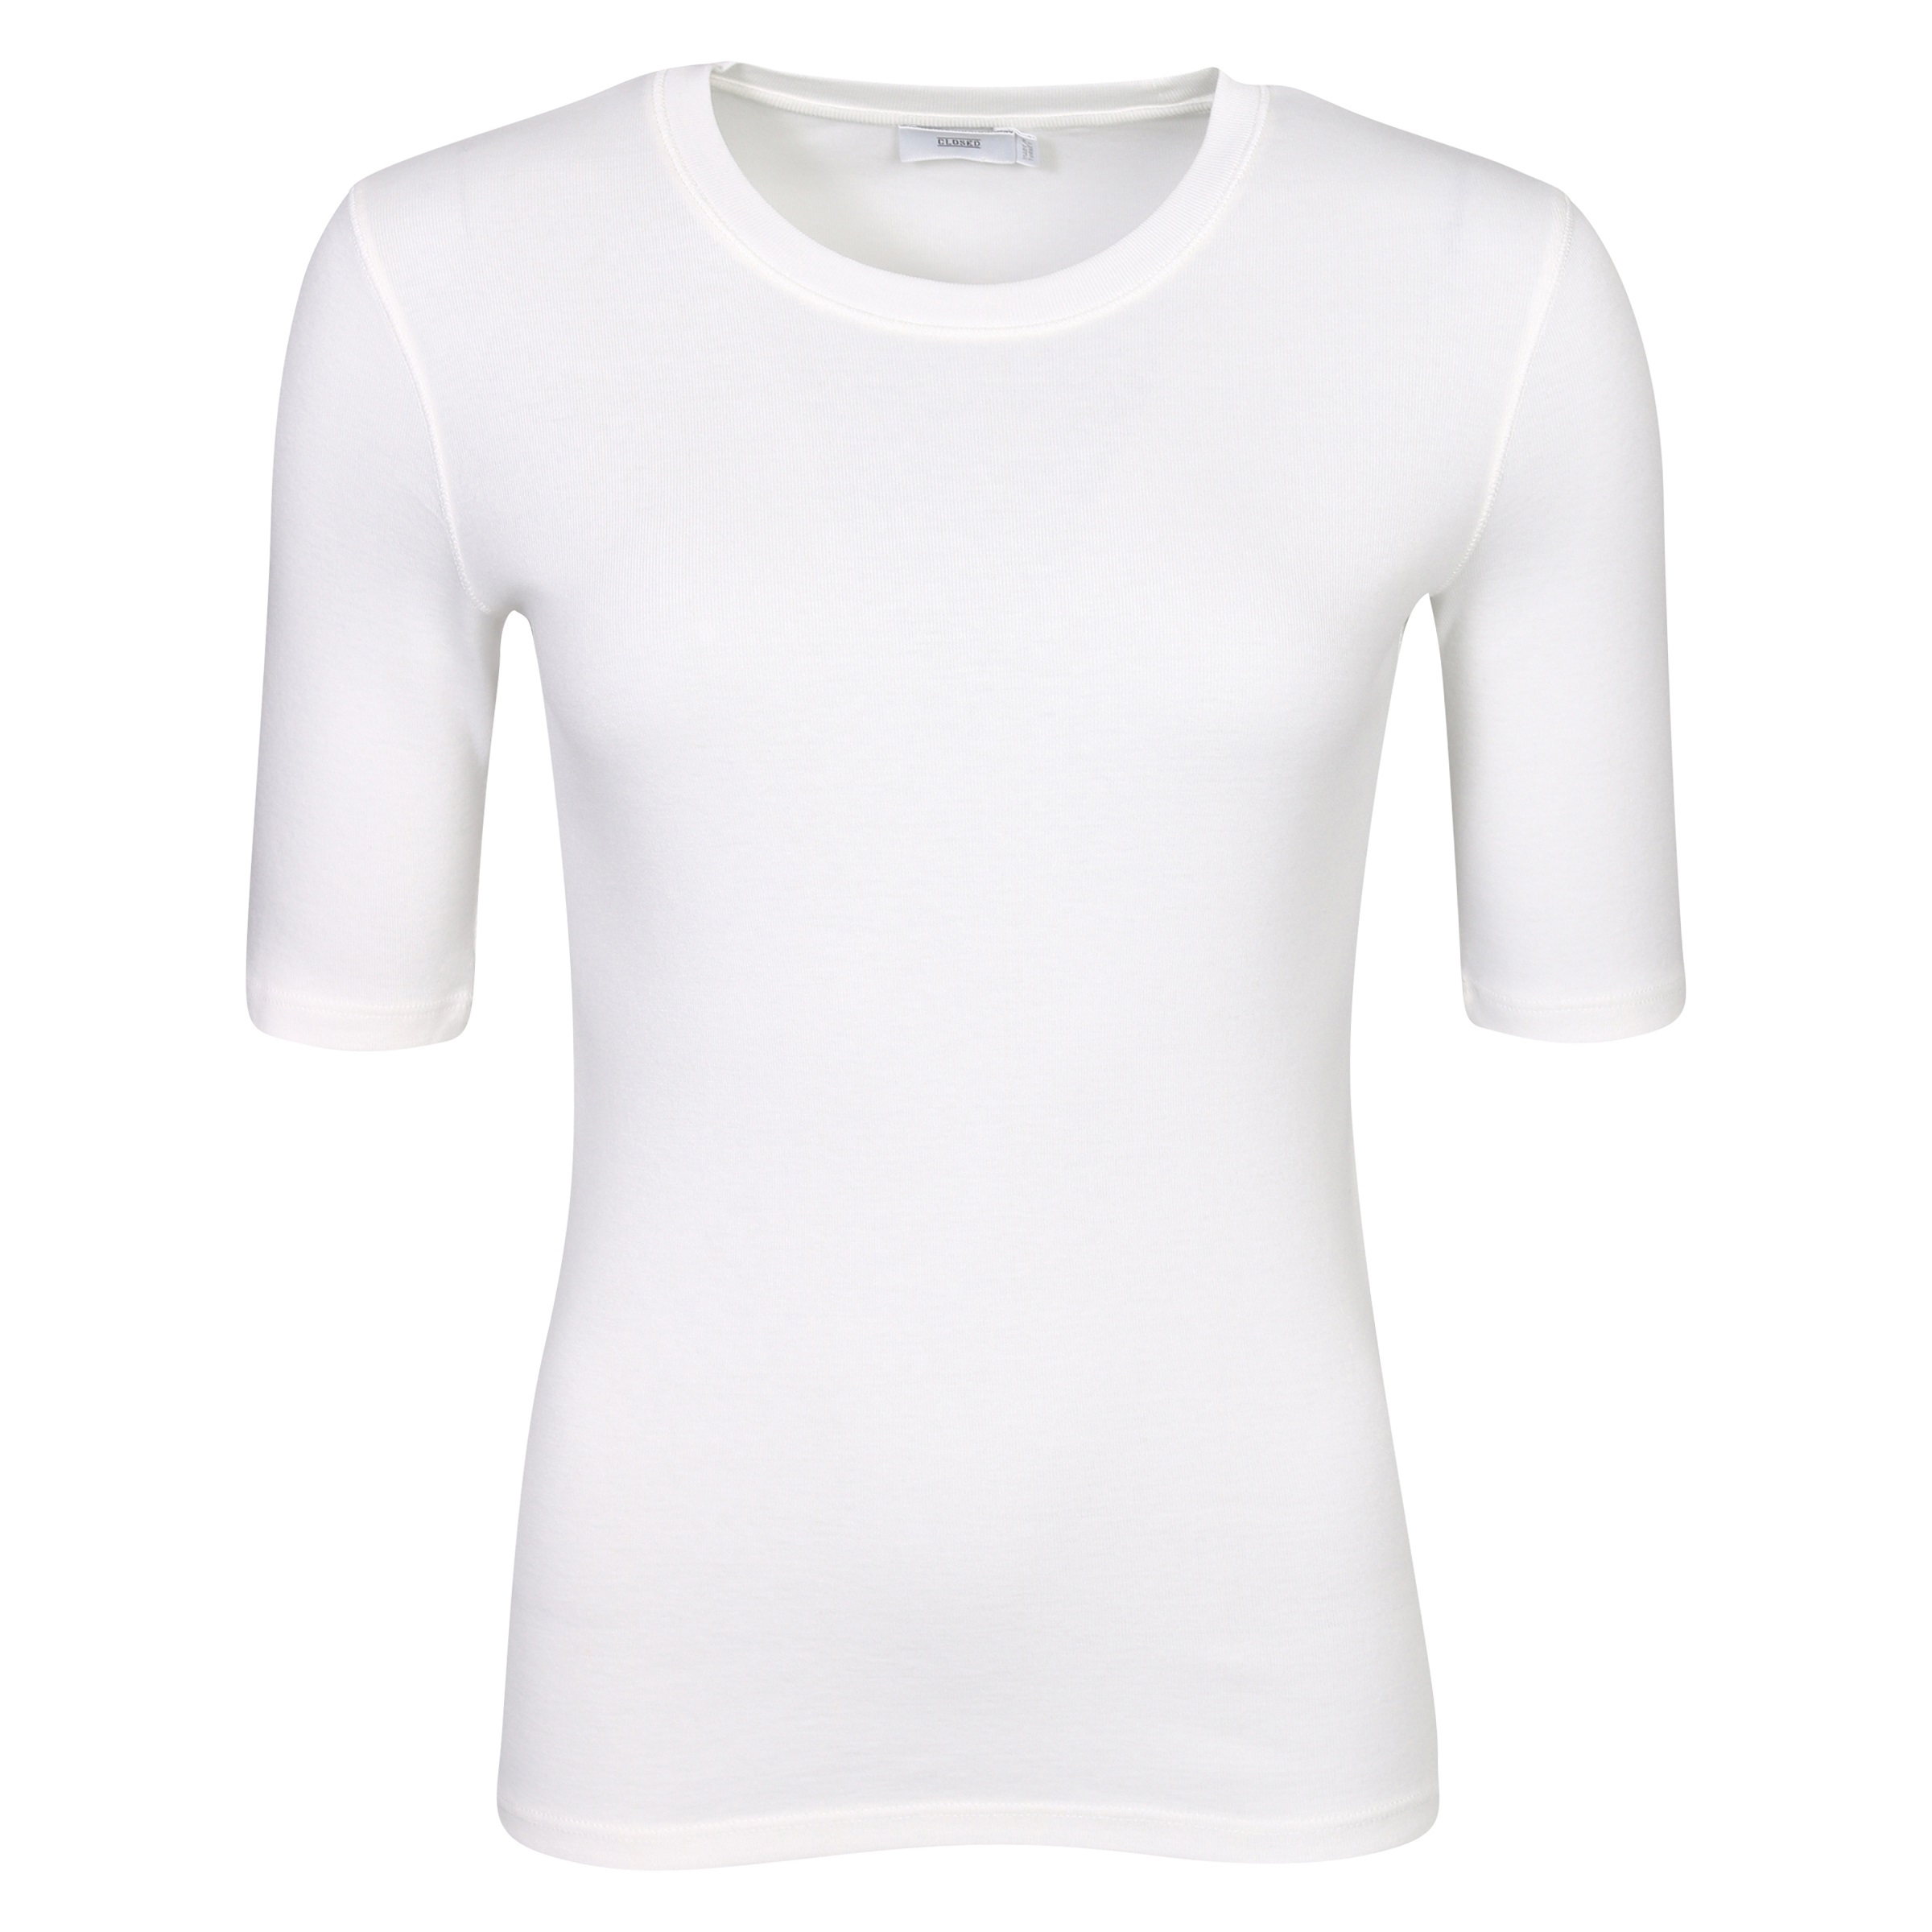 CLOSED Shortsleeve T-Shirt in Ivory